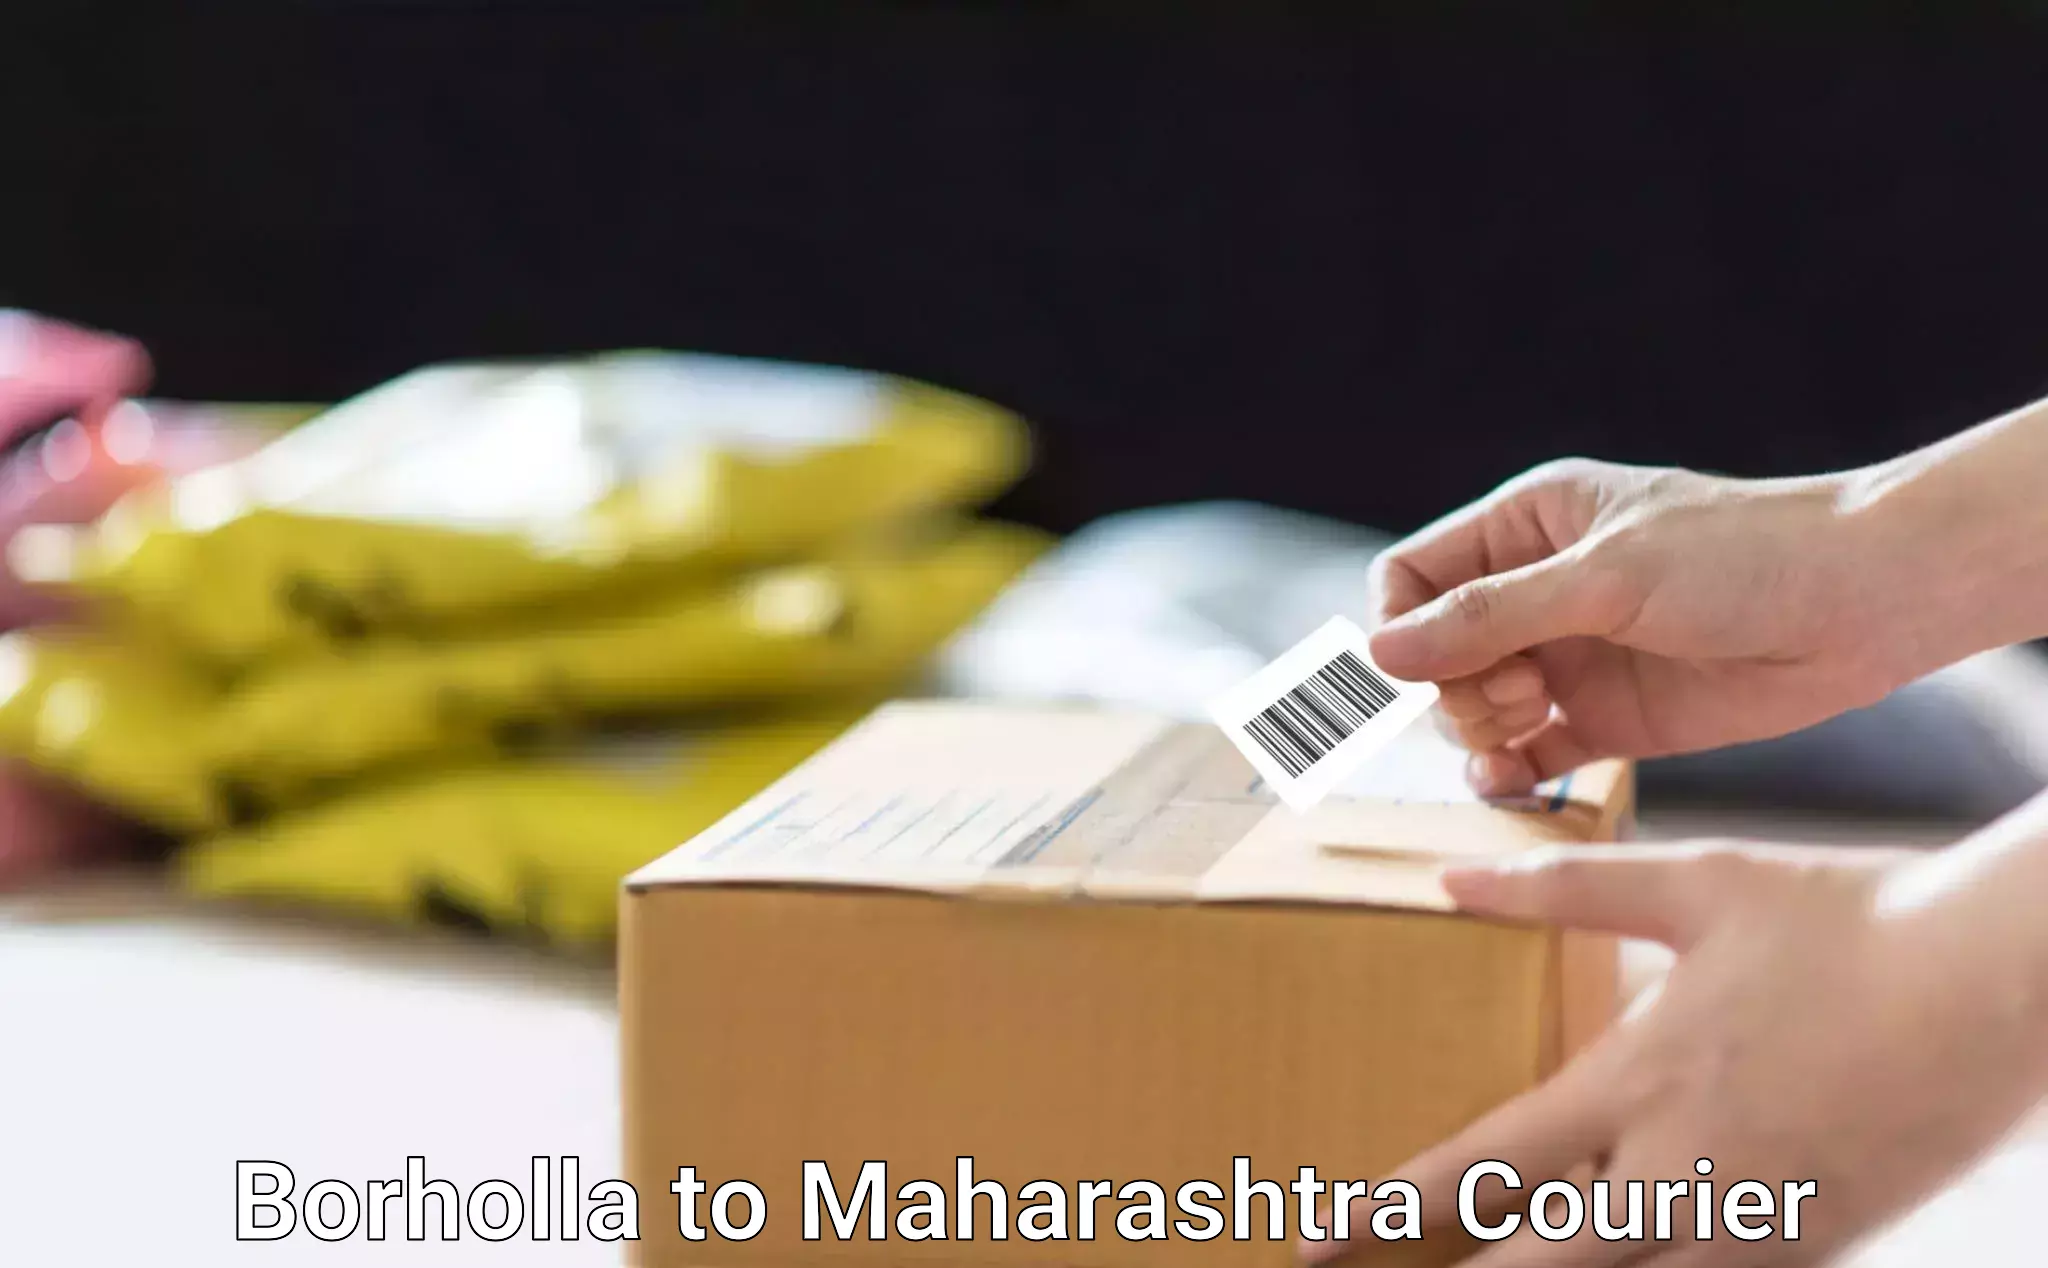 Customer-friendly courier services Borholla to Baramati